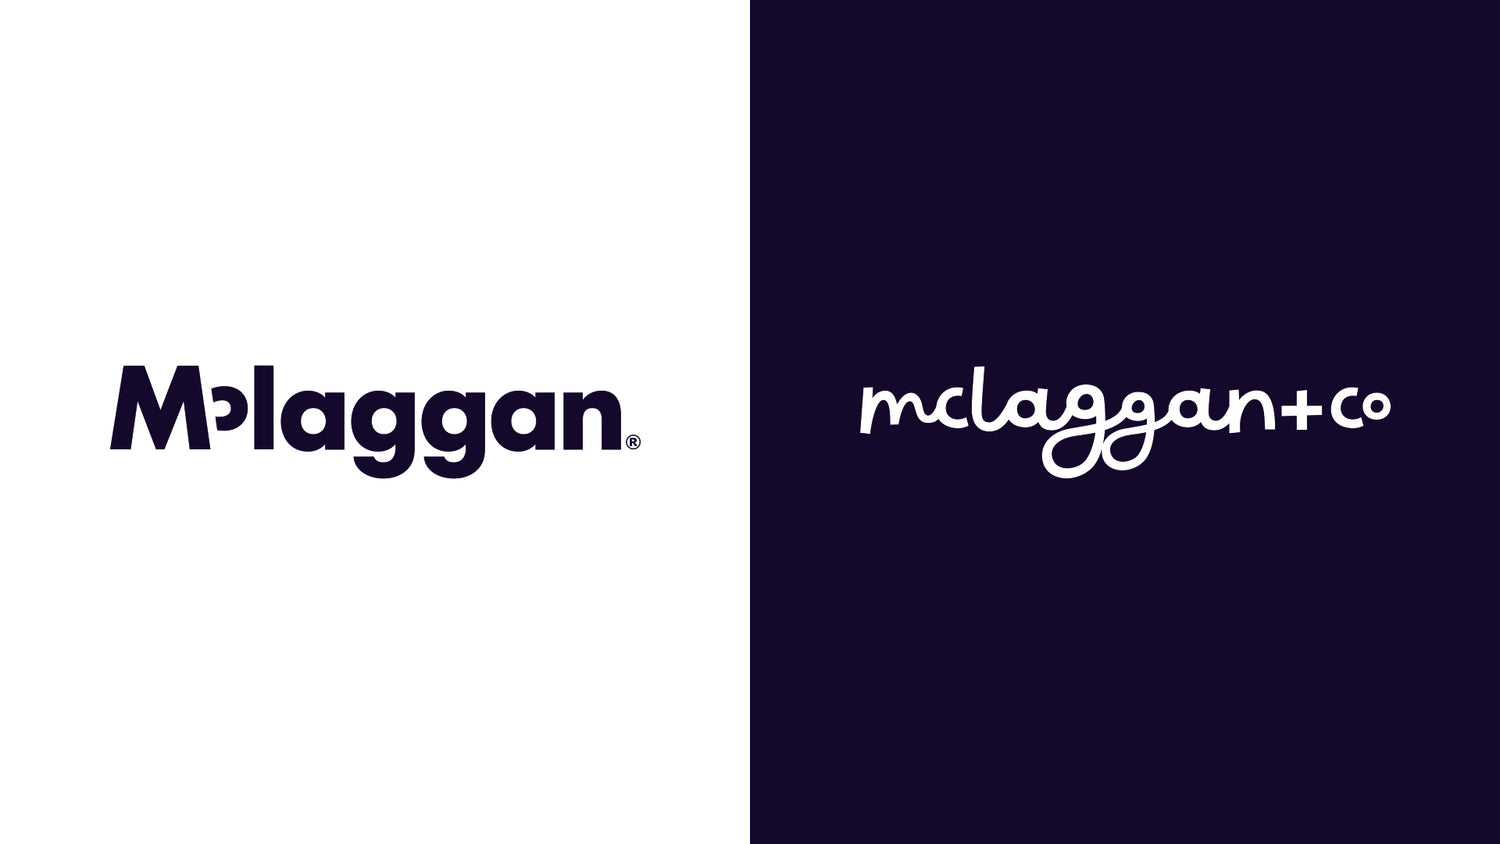 Mclaggan Smith Mugs Ltd celebrates its 50-Year Anniversary with a new look